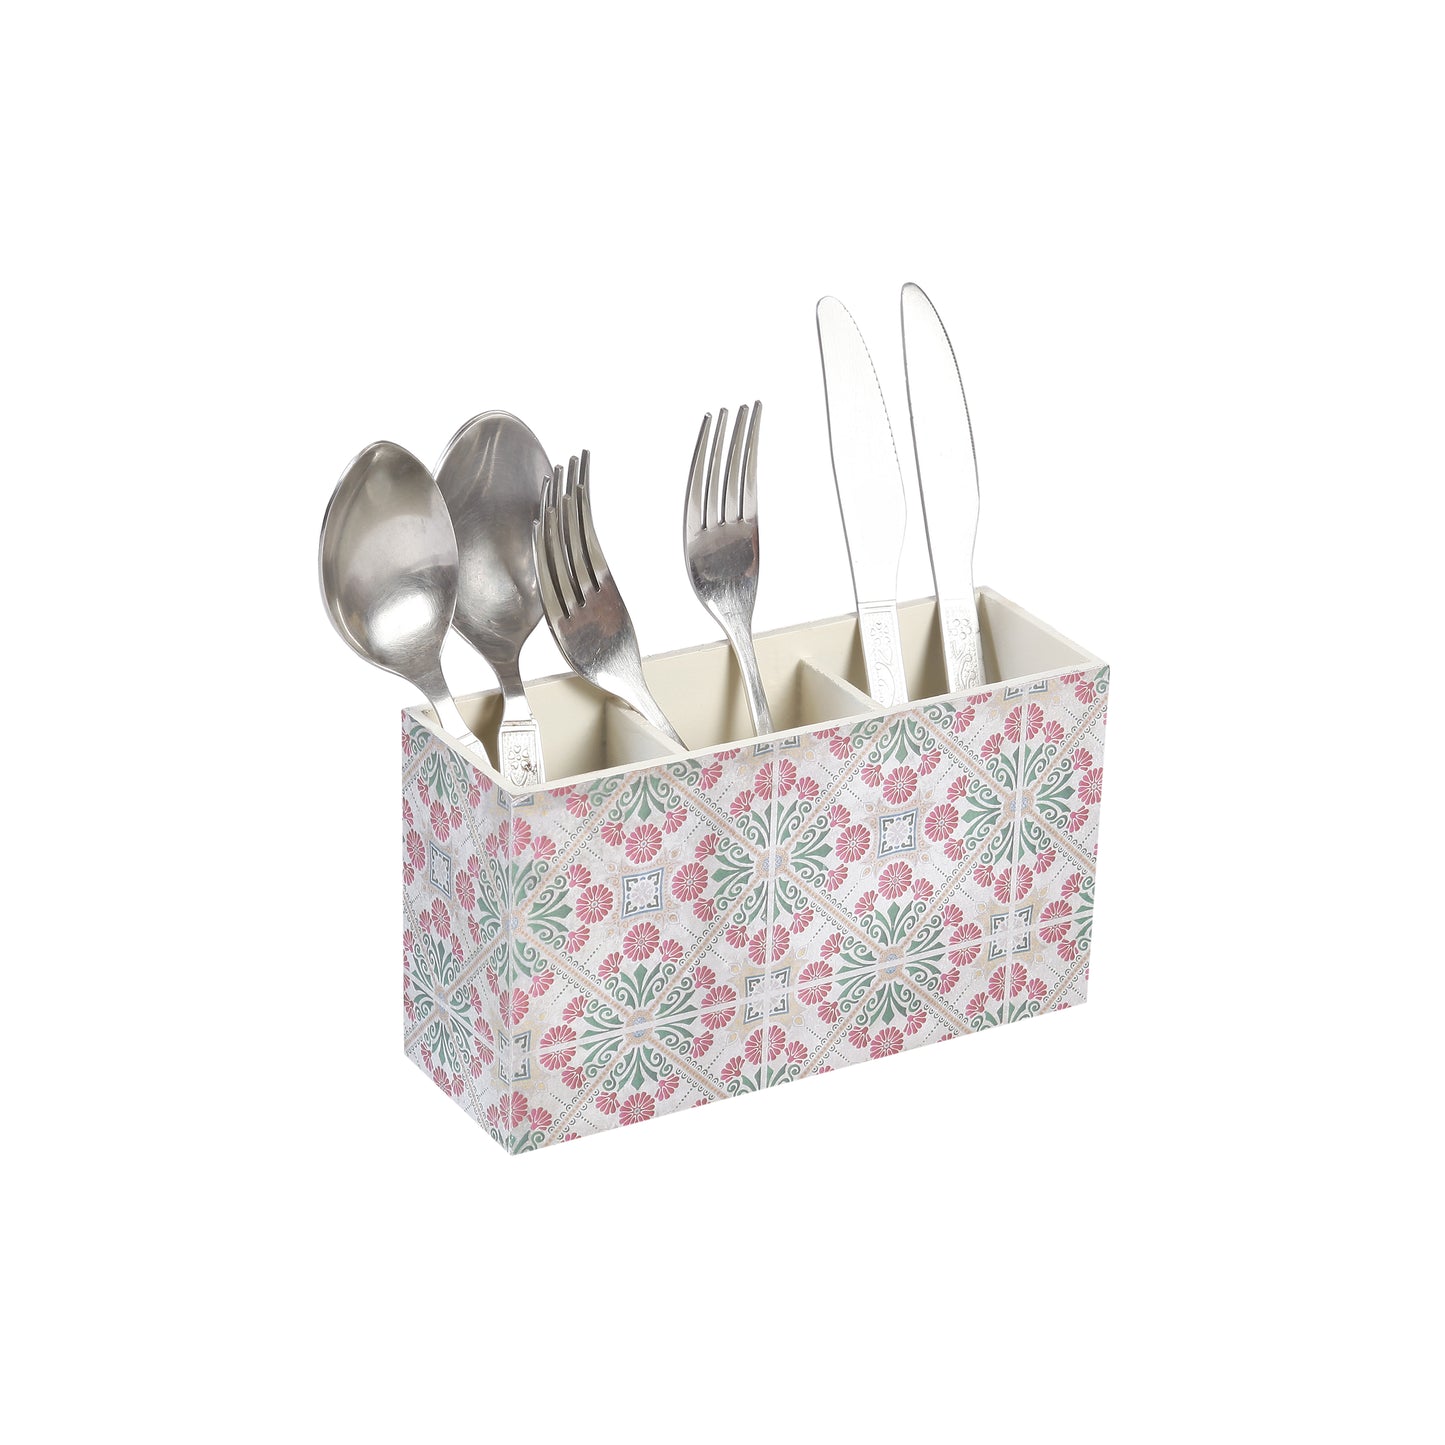 A Tiny Mistake Turkish Pink Tiles Wooden Cutlery Holder, 18 x 10 x 6.5 cm